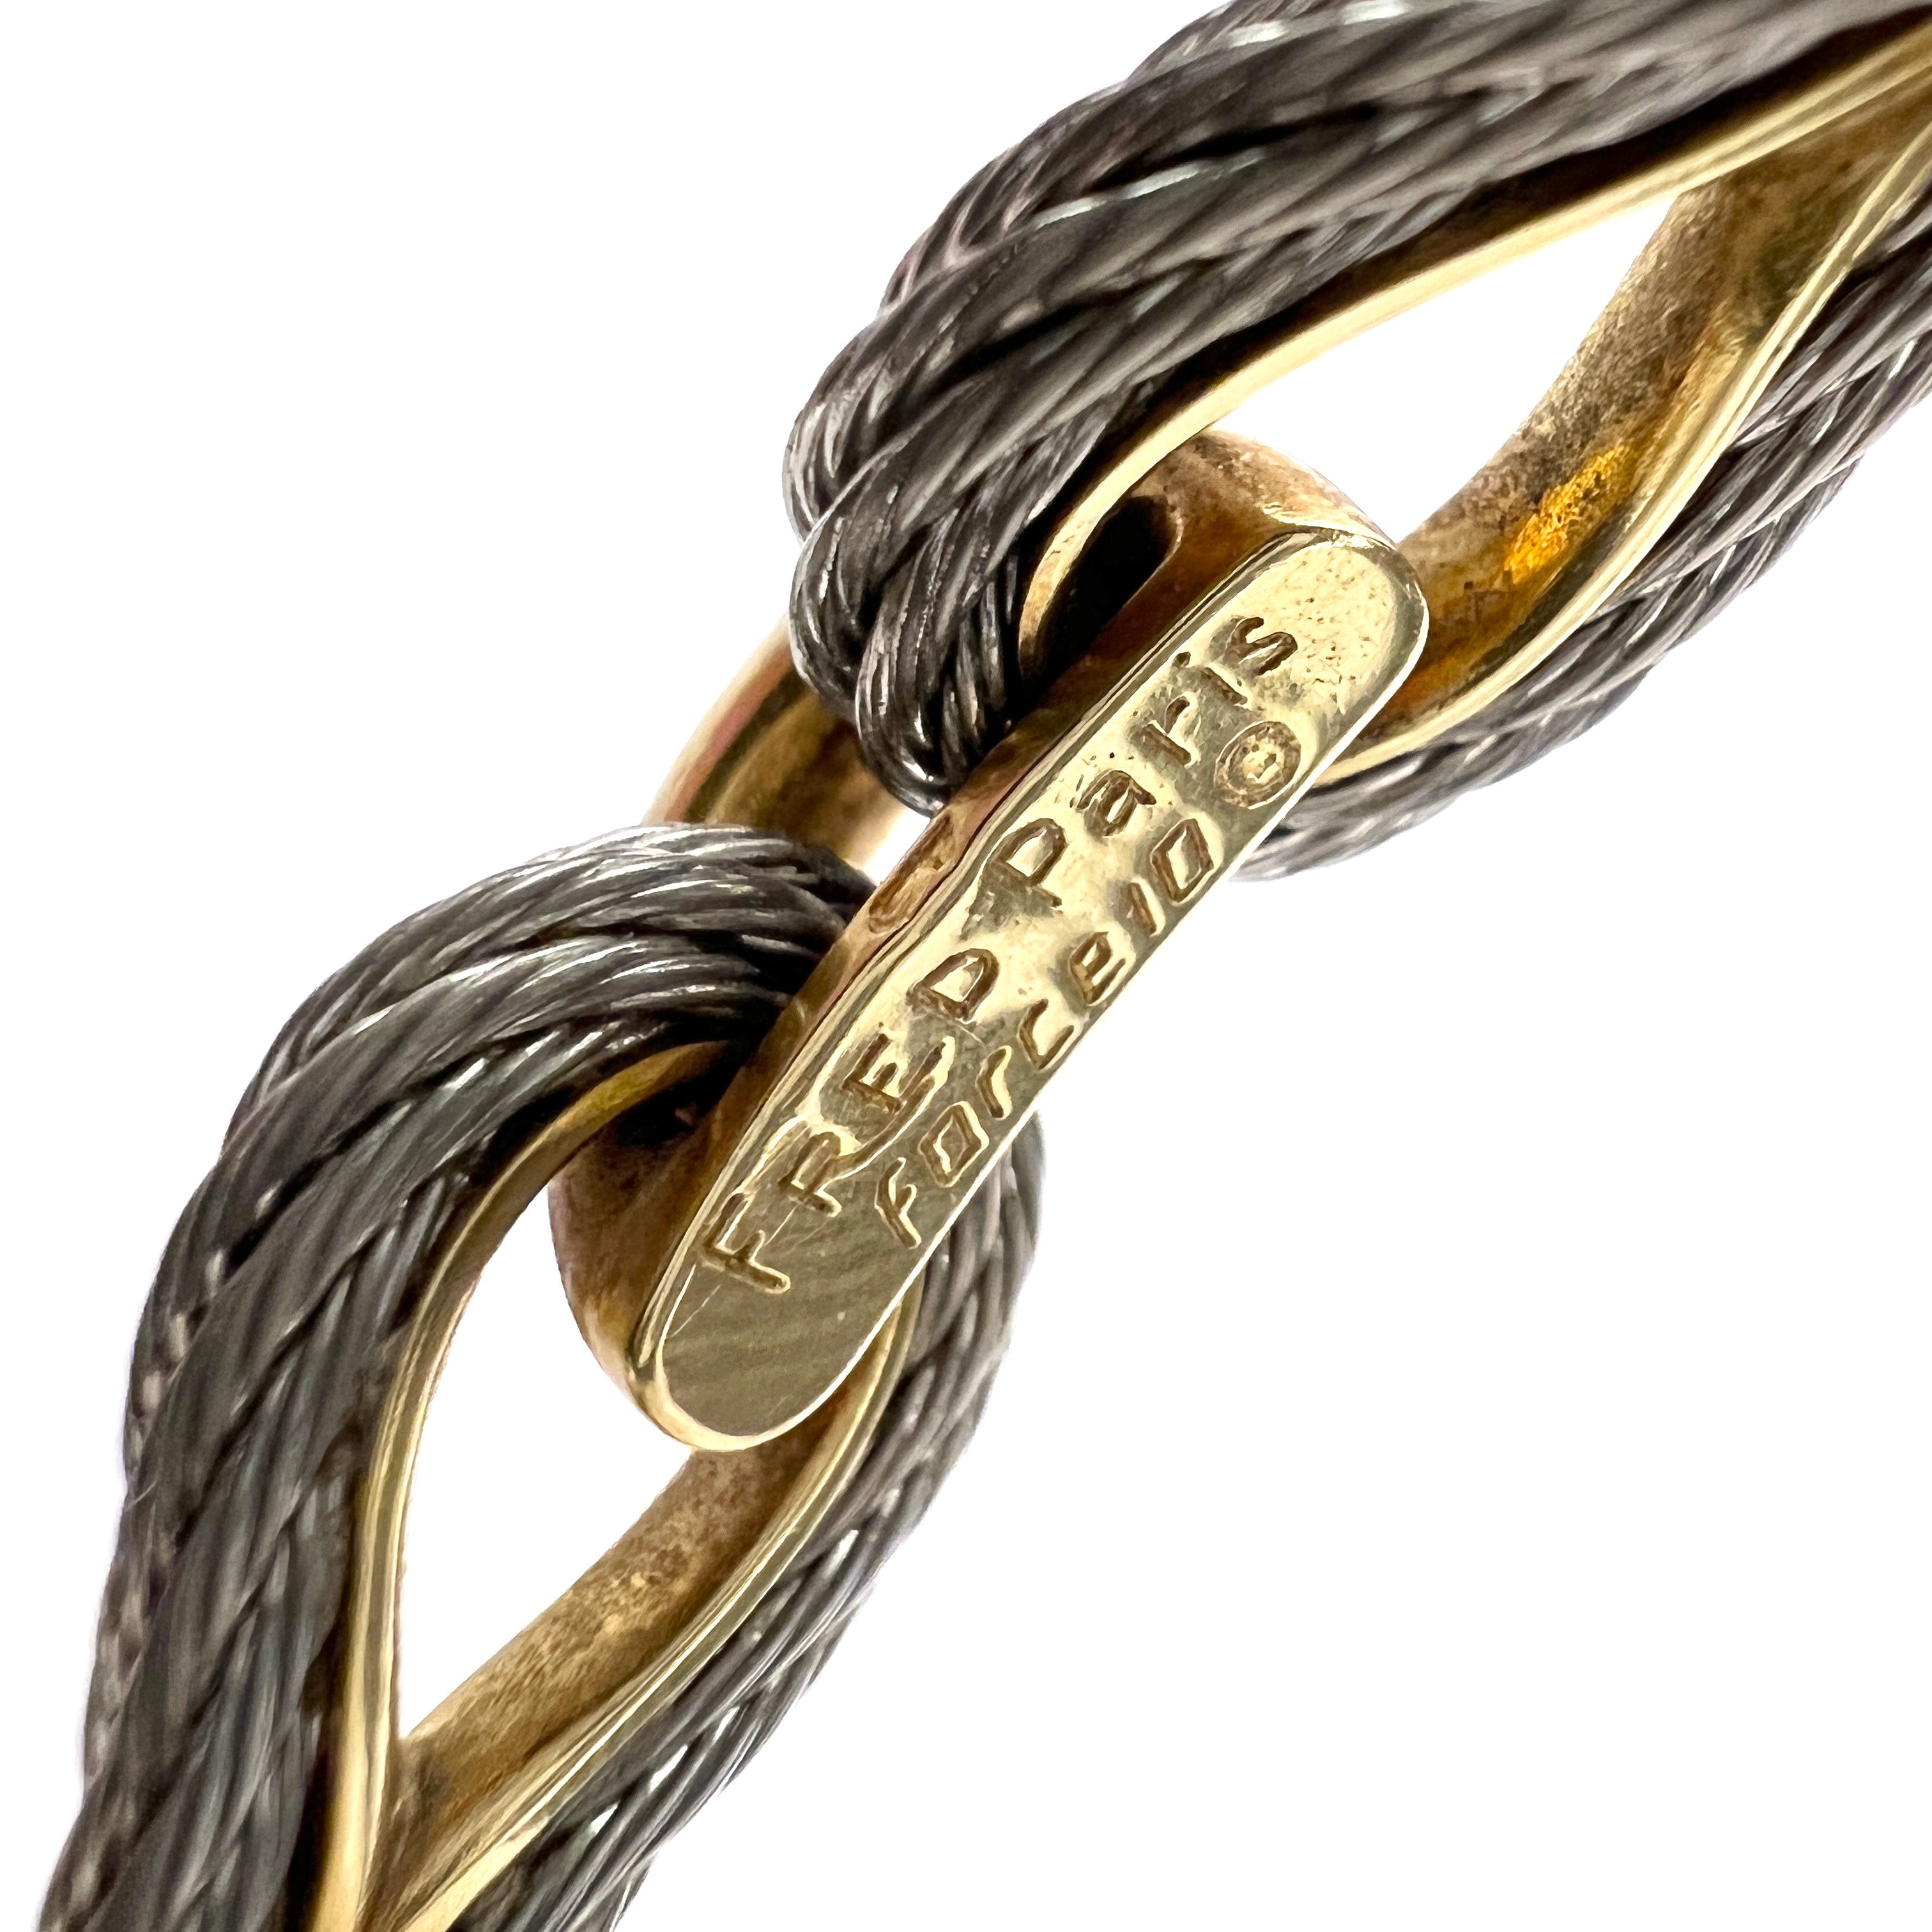 Fred Force 10 LM Leather,Stainless Steel,Yellow Gold (18K) Charm